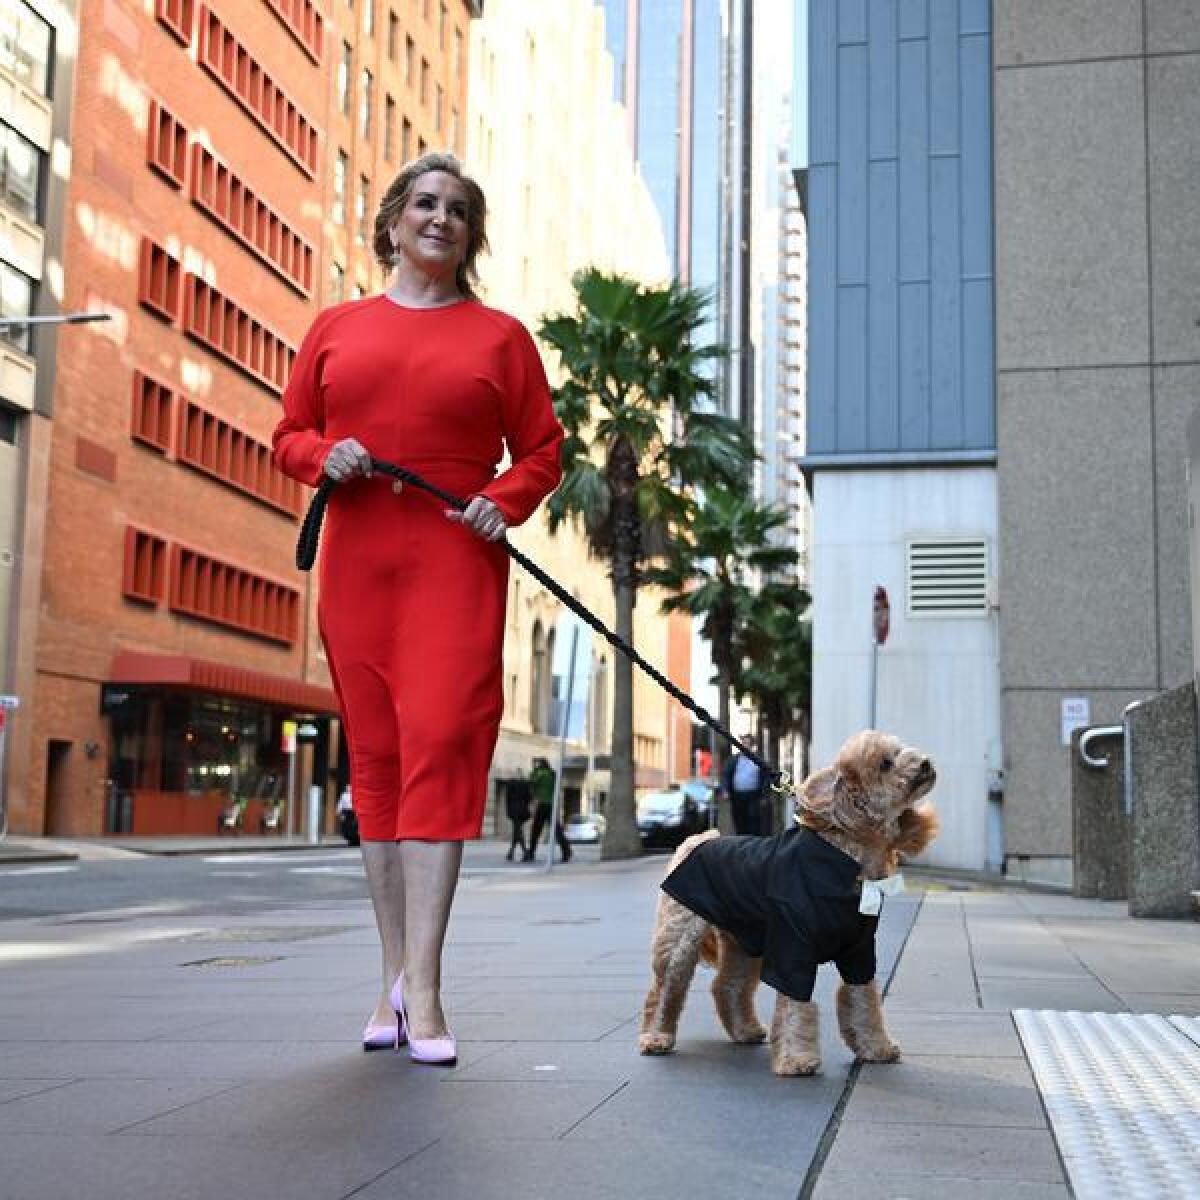 Gina Edwards, with her Cavoodle Oscar, arrives at the Federal Court